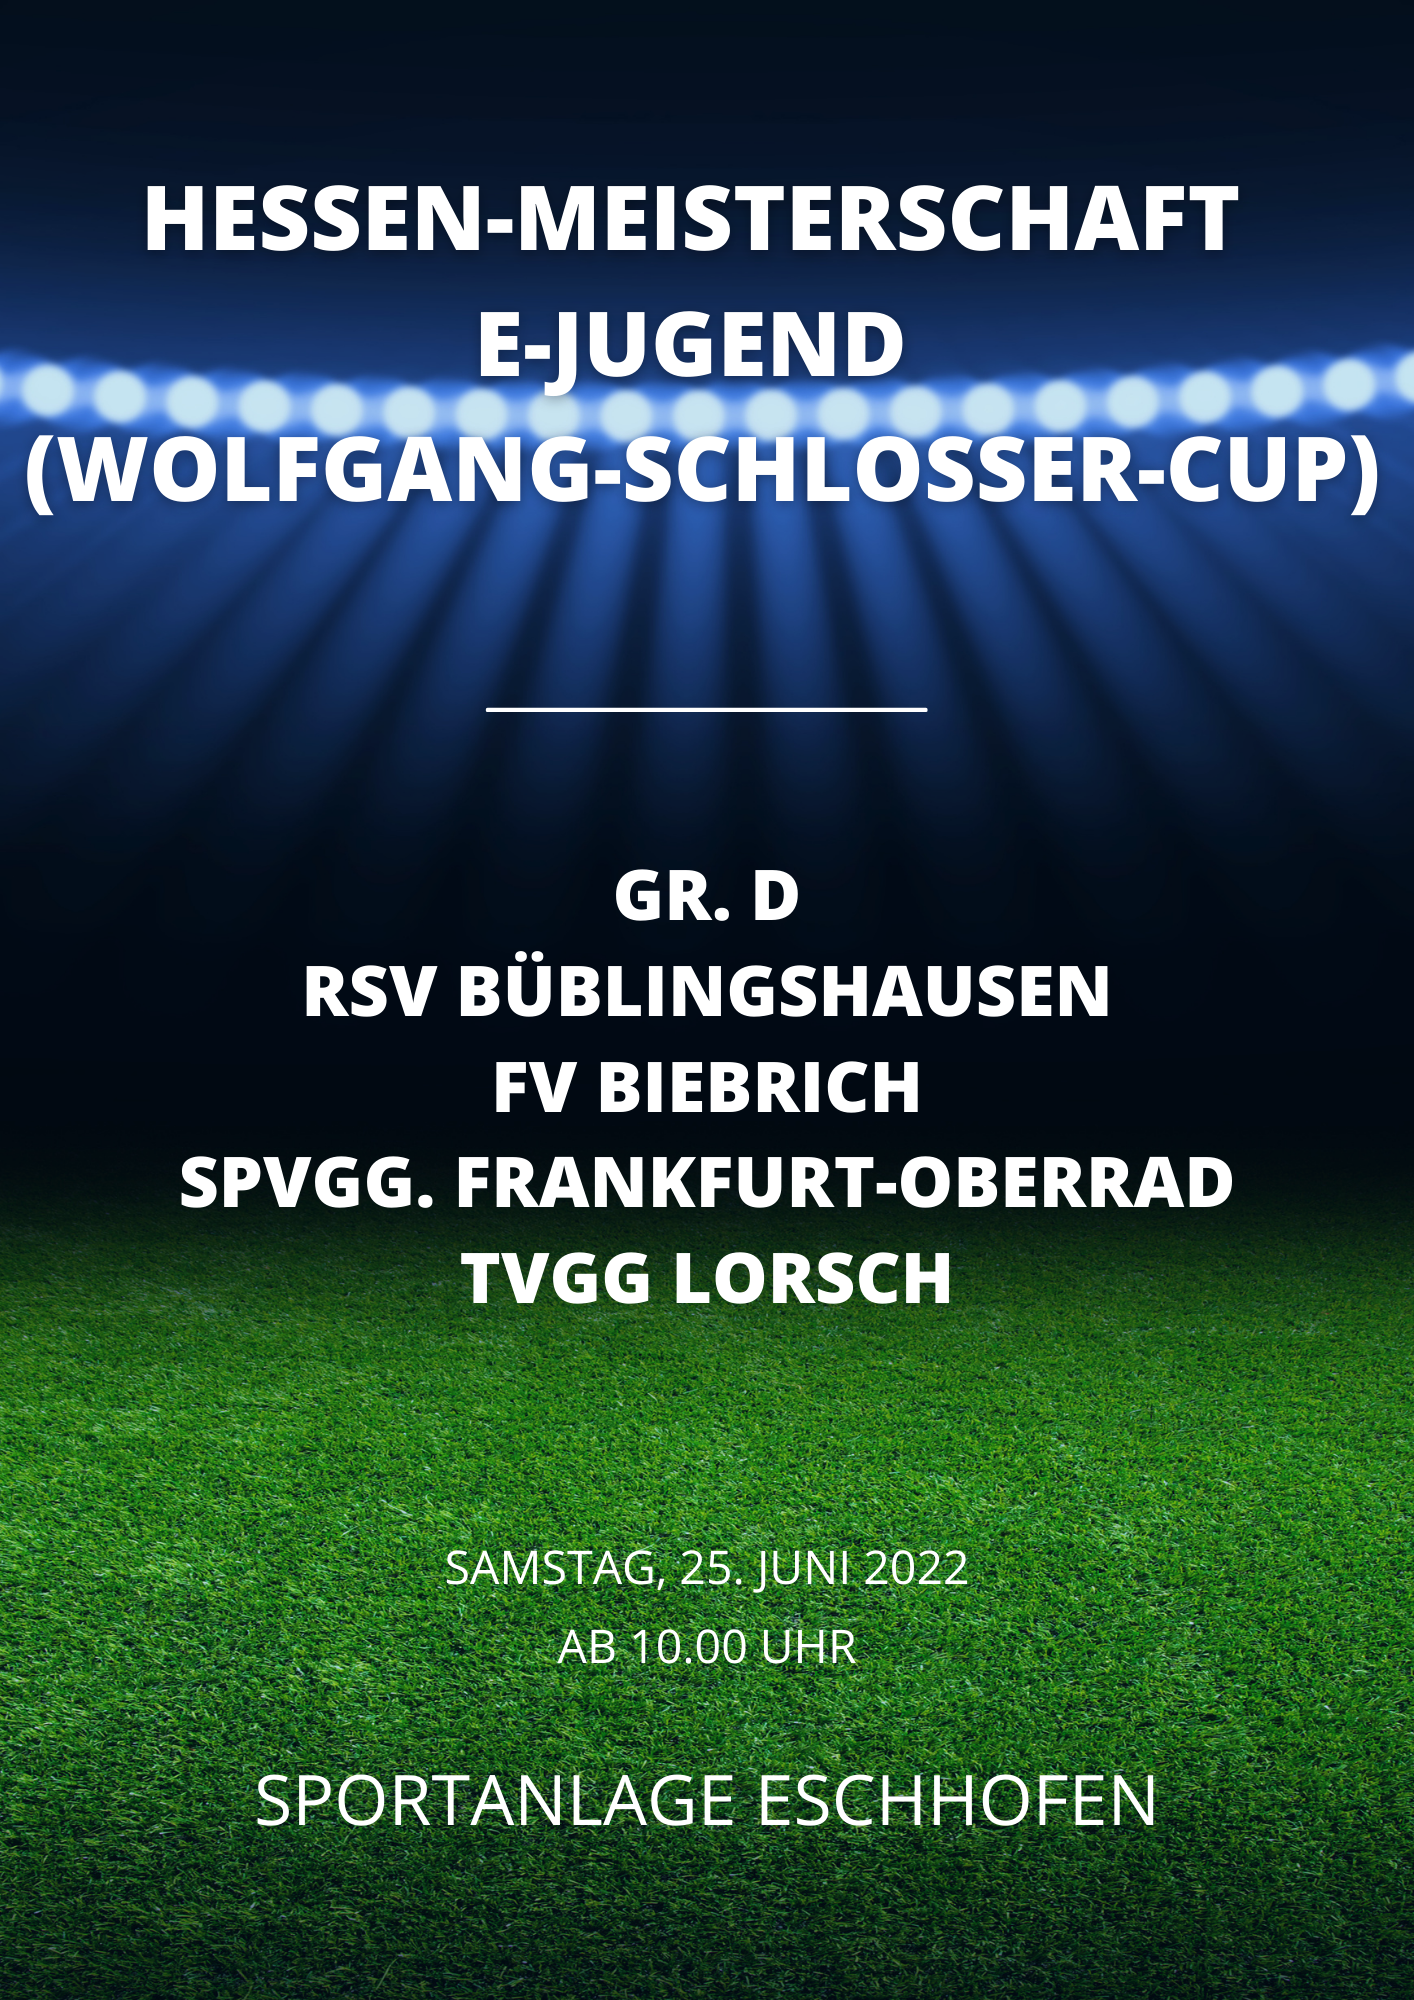 You are currently viewing RSV-E-Jugend Samstag bei Hessenmeisterschaft